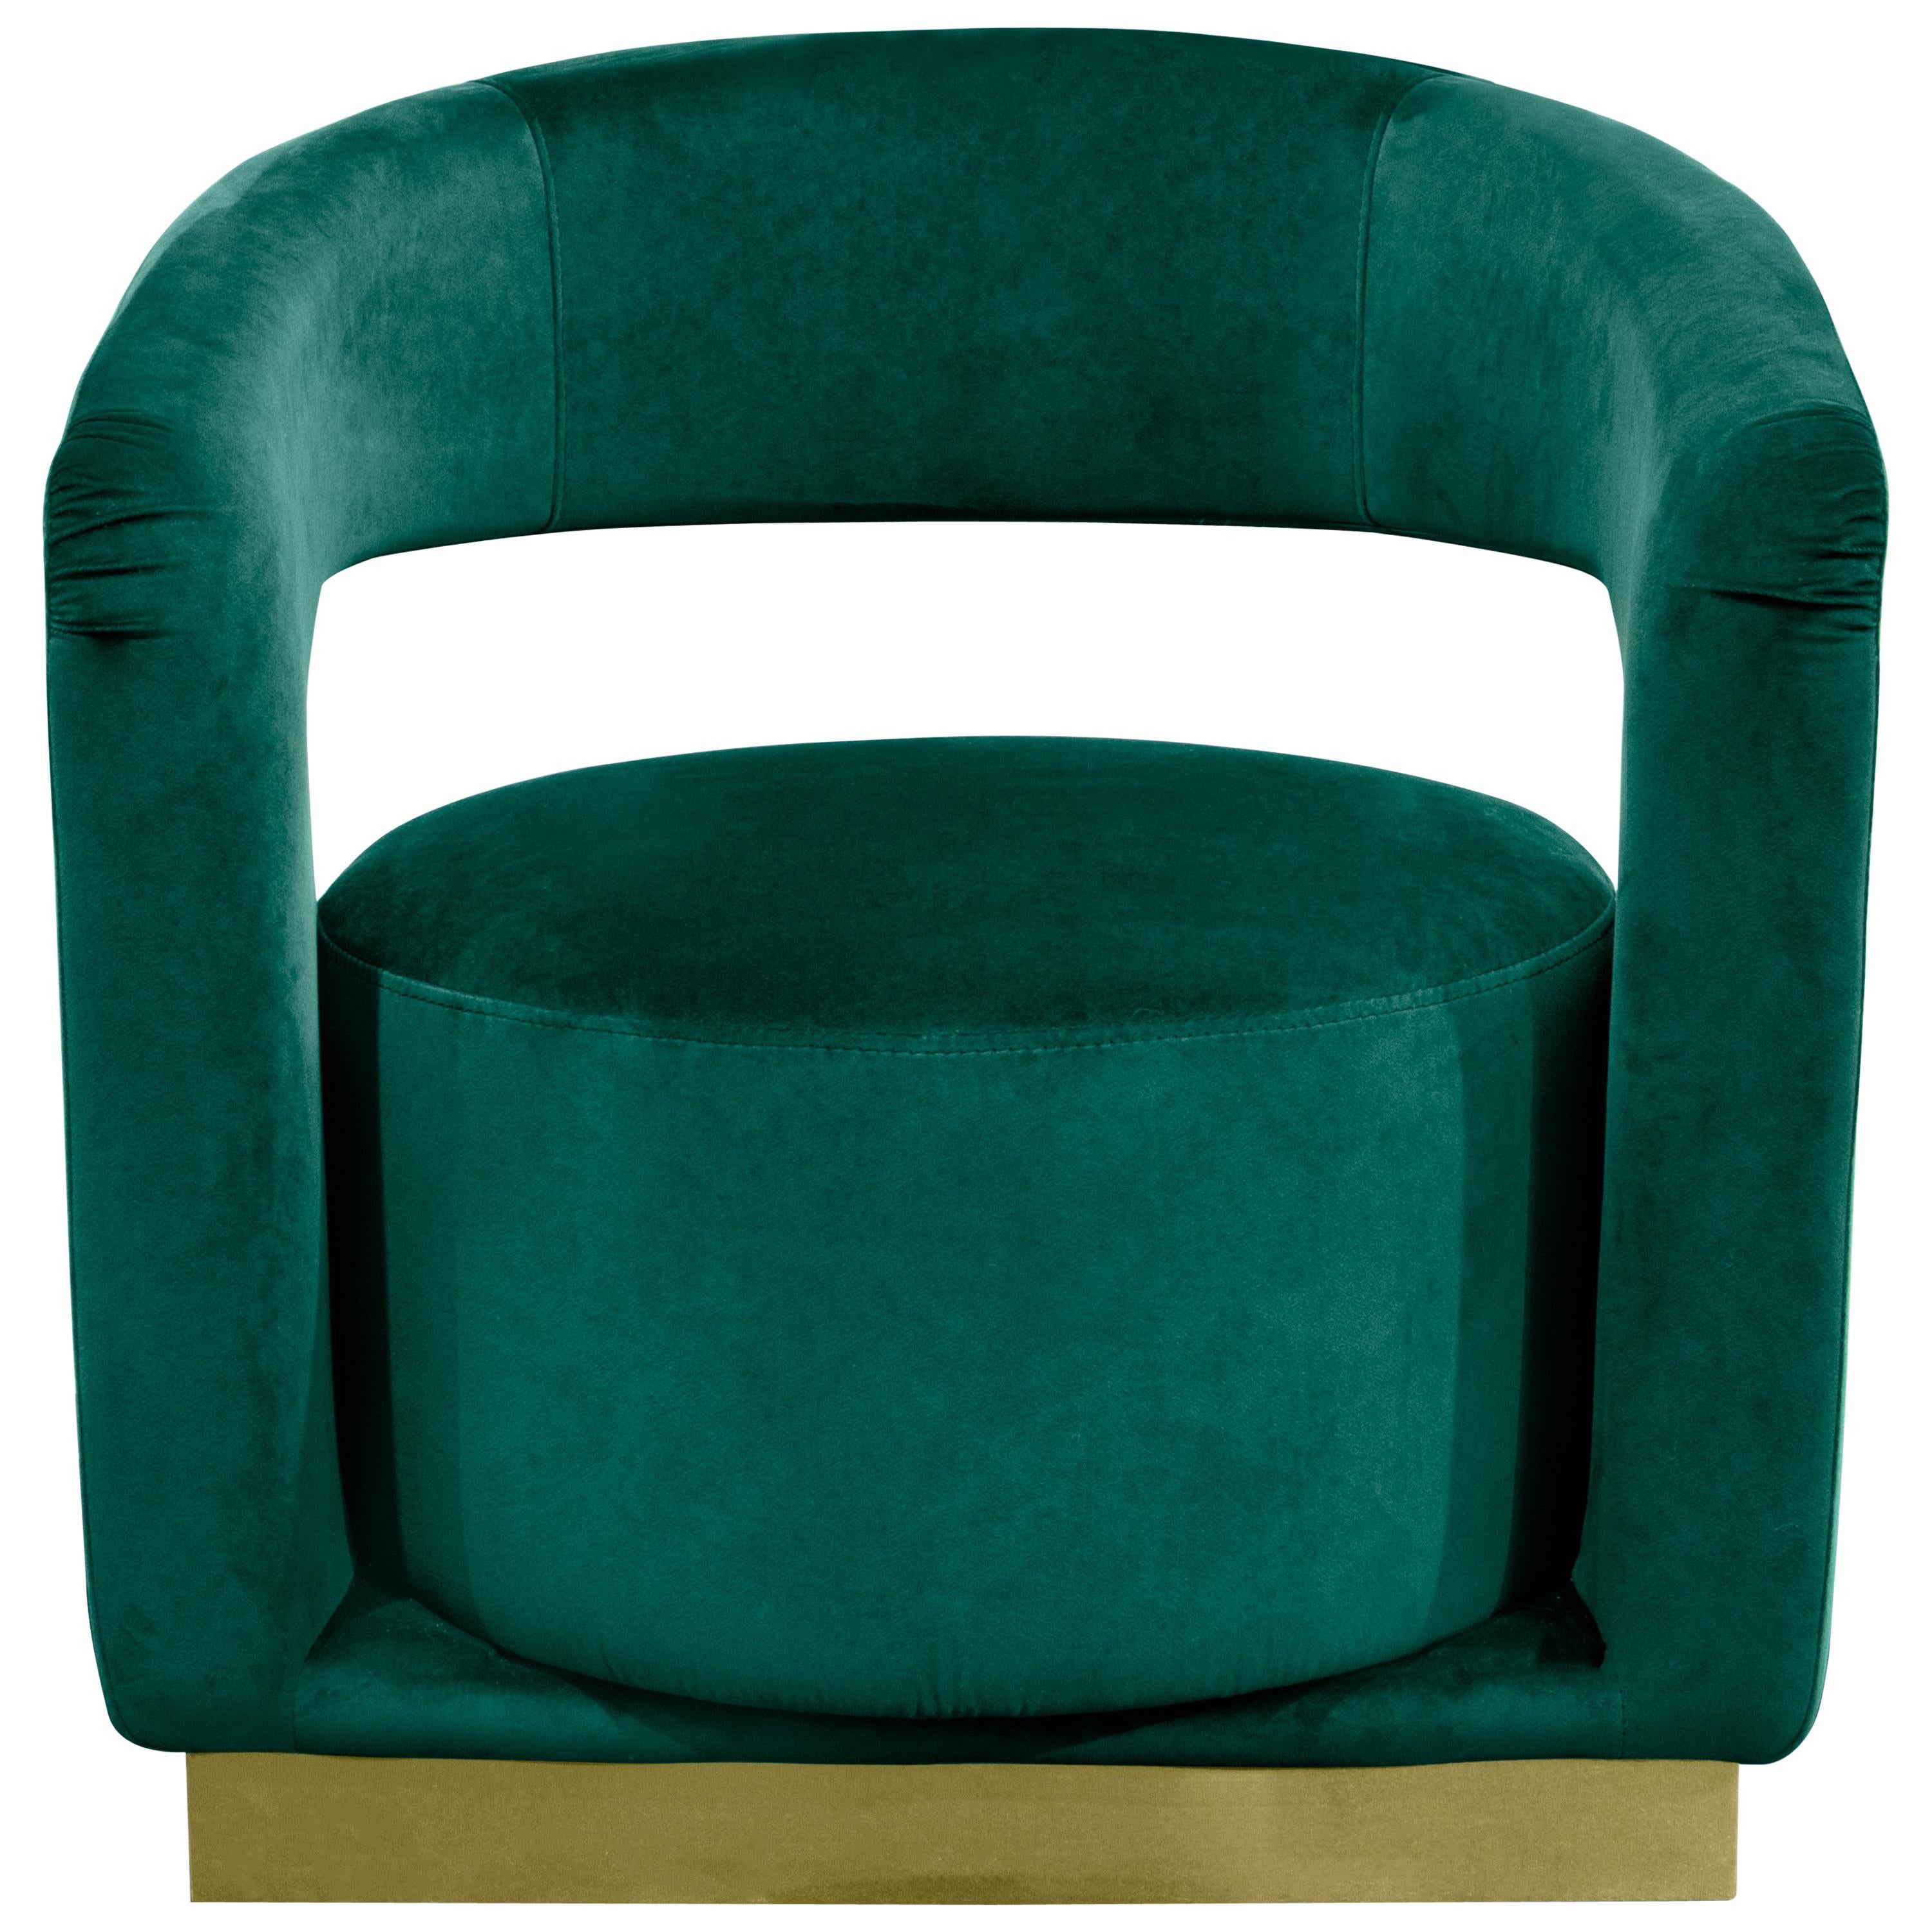 Ellen is a sophisticated armchair, featuring a modern tub design. Built on top of a polished brass base, this accent chair is upholstered with a lustruous velvet and its curvilinear open back contrasts with a rectangular shape on the front. It has a